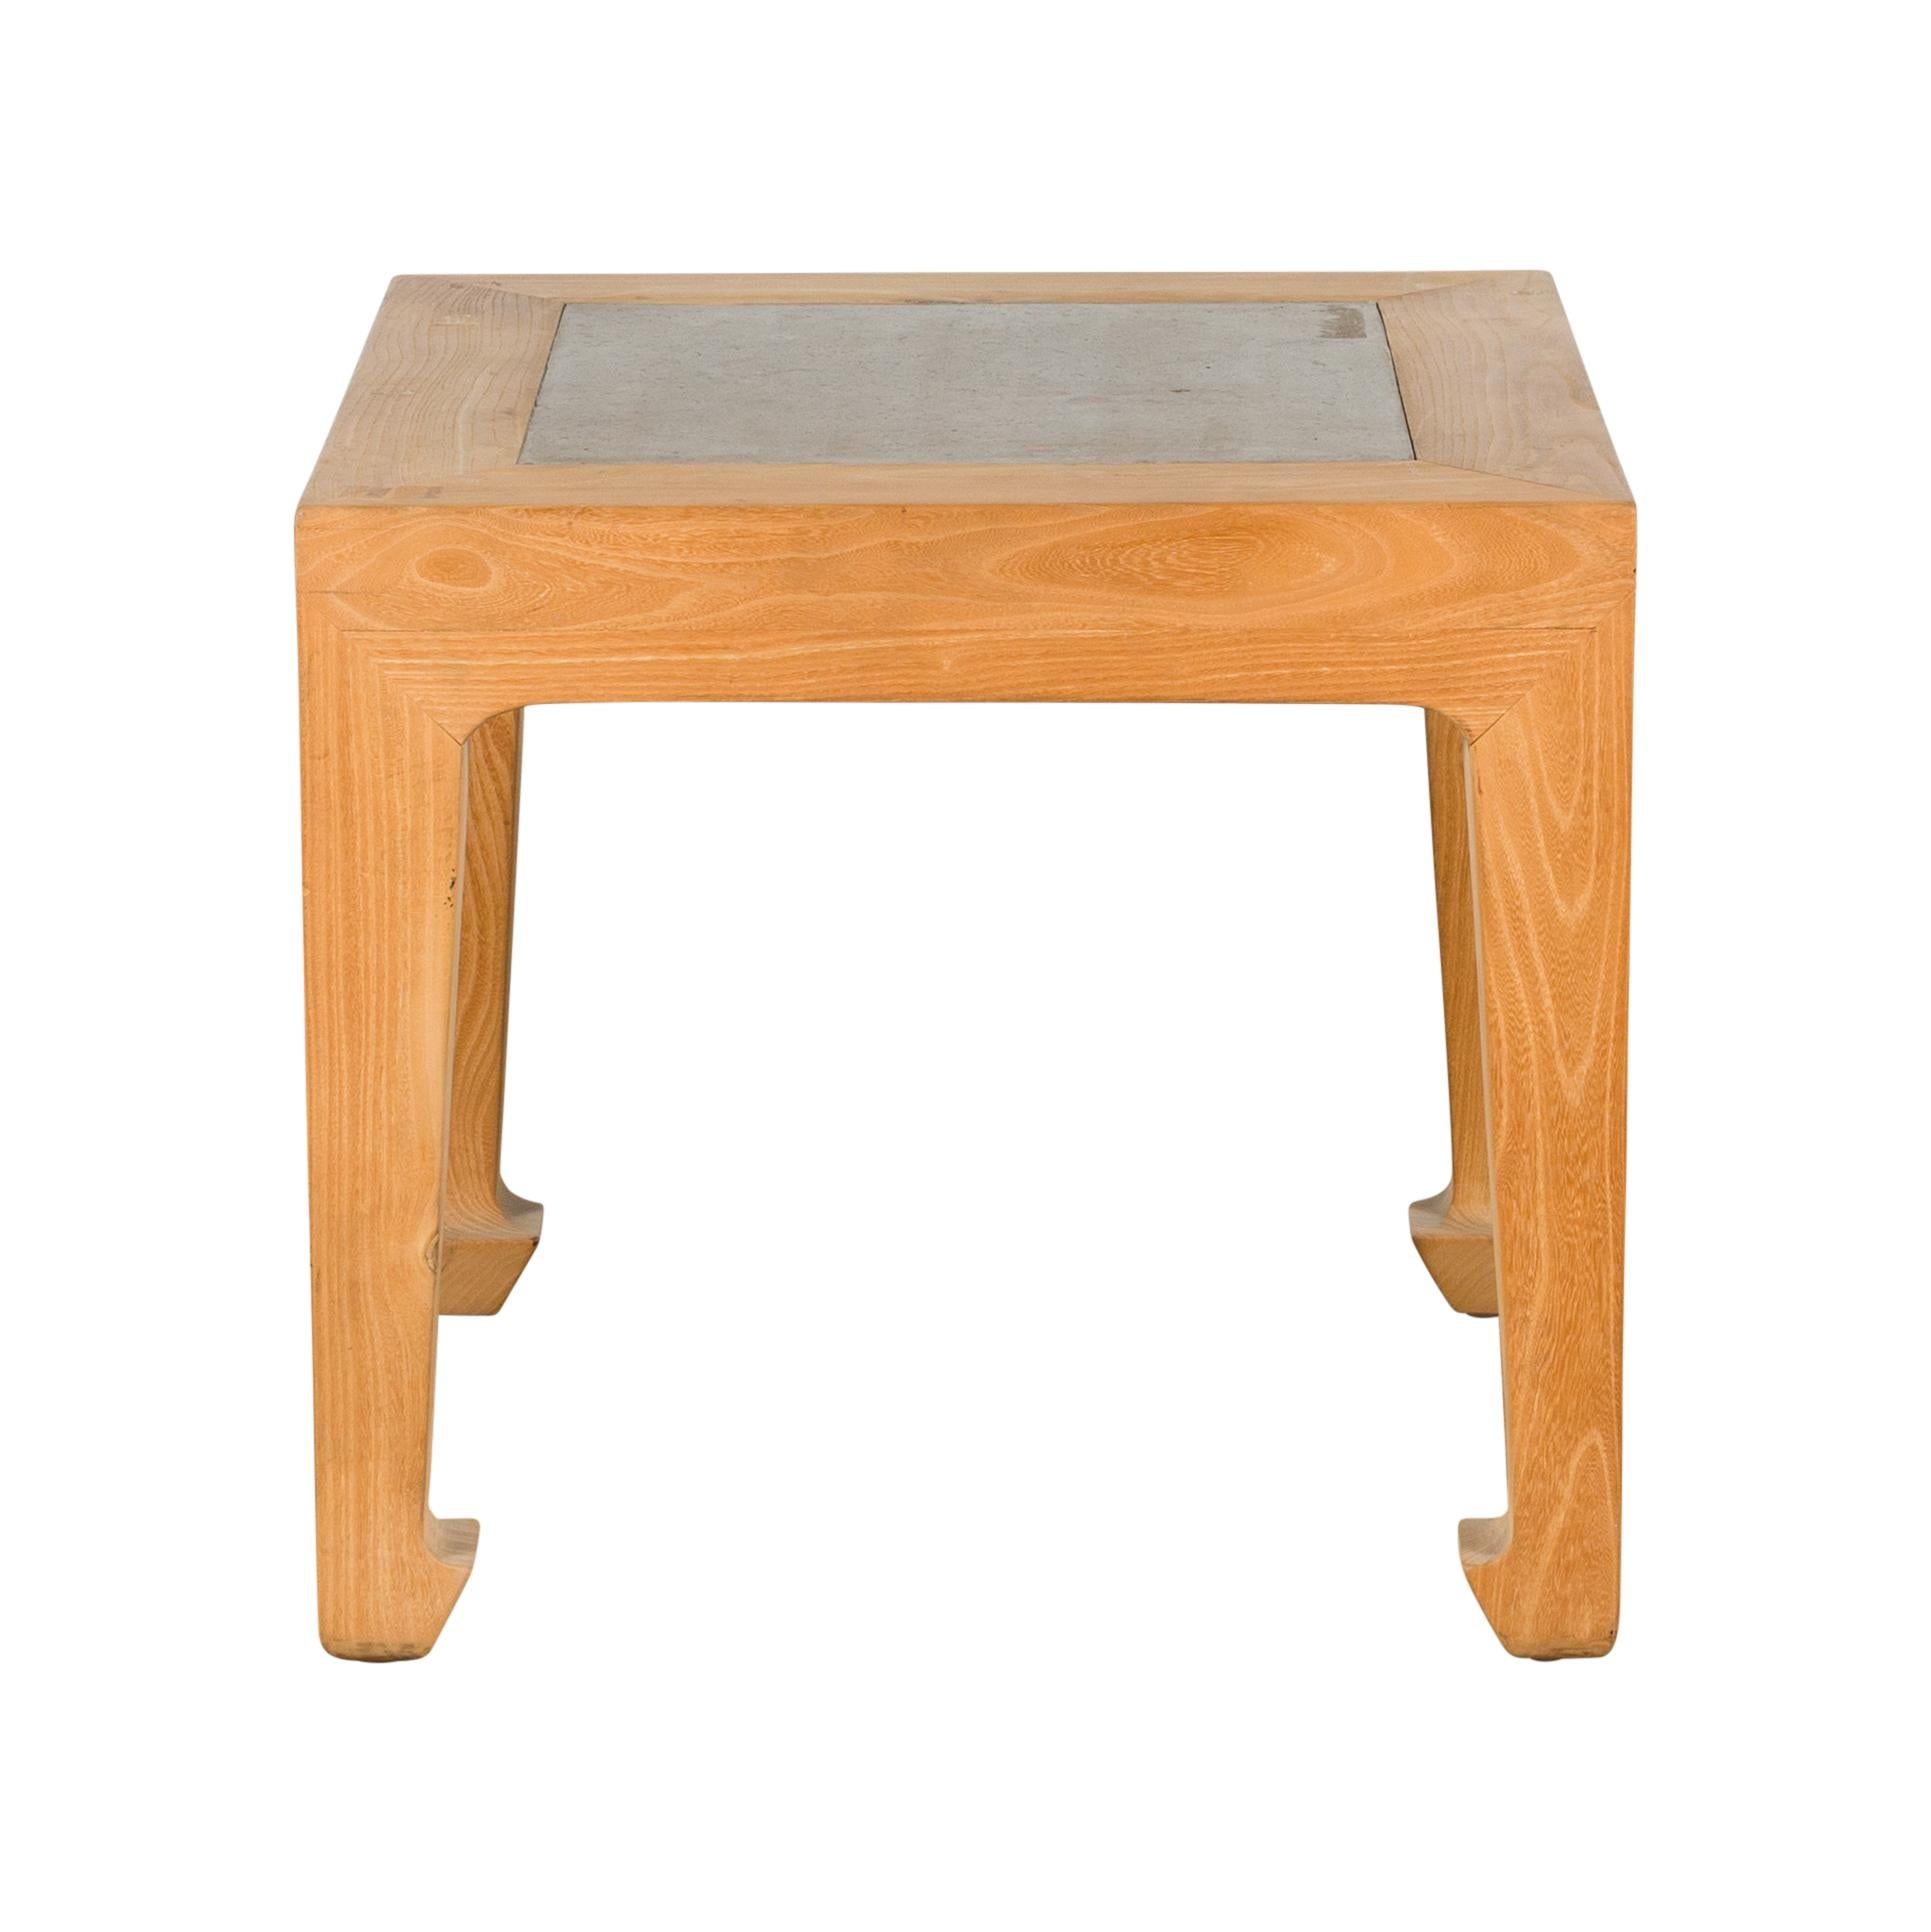 A Chinese vintage bleached elm wood square shaped side table from the mid 20th century, with inset stone tile top and horse hoof feet. Created in China during the midcentury period, this vintage bleached elm wood side table features a square top